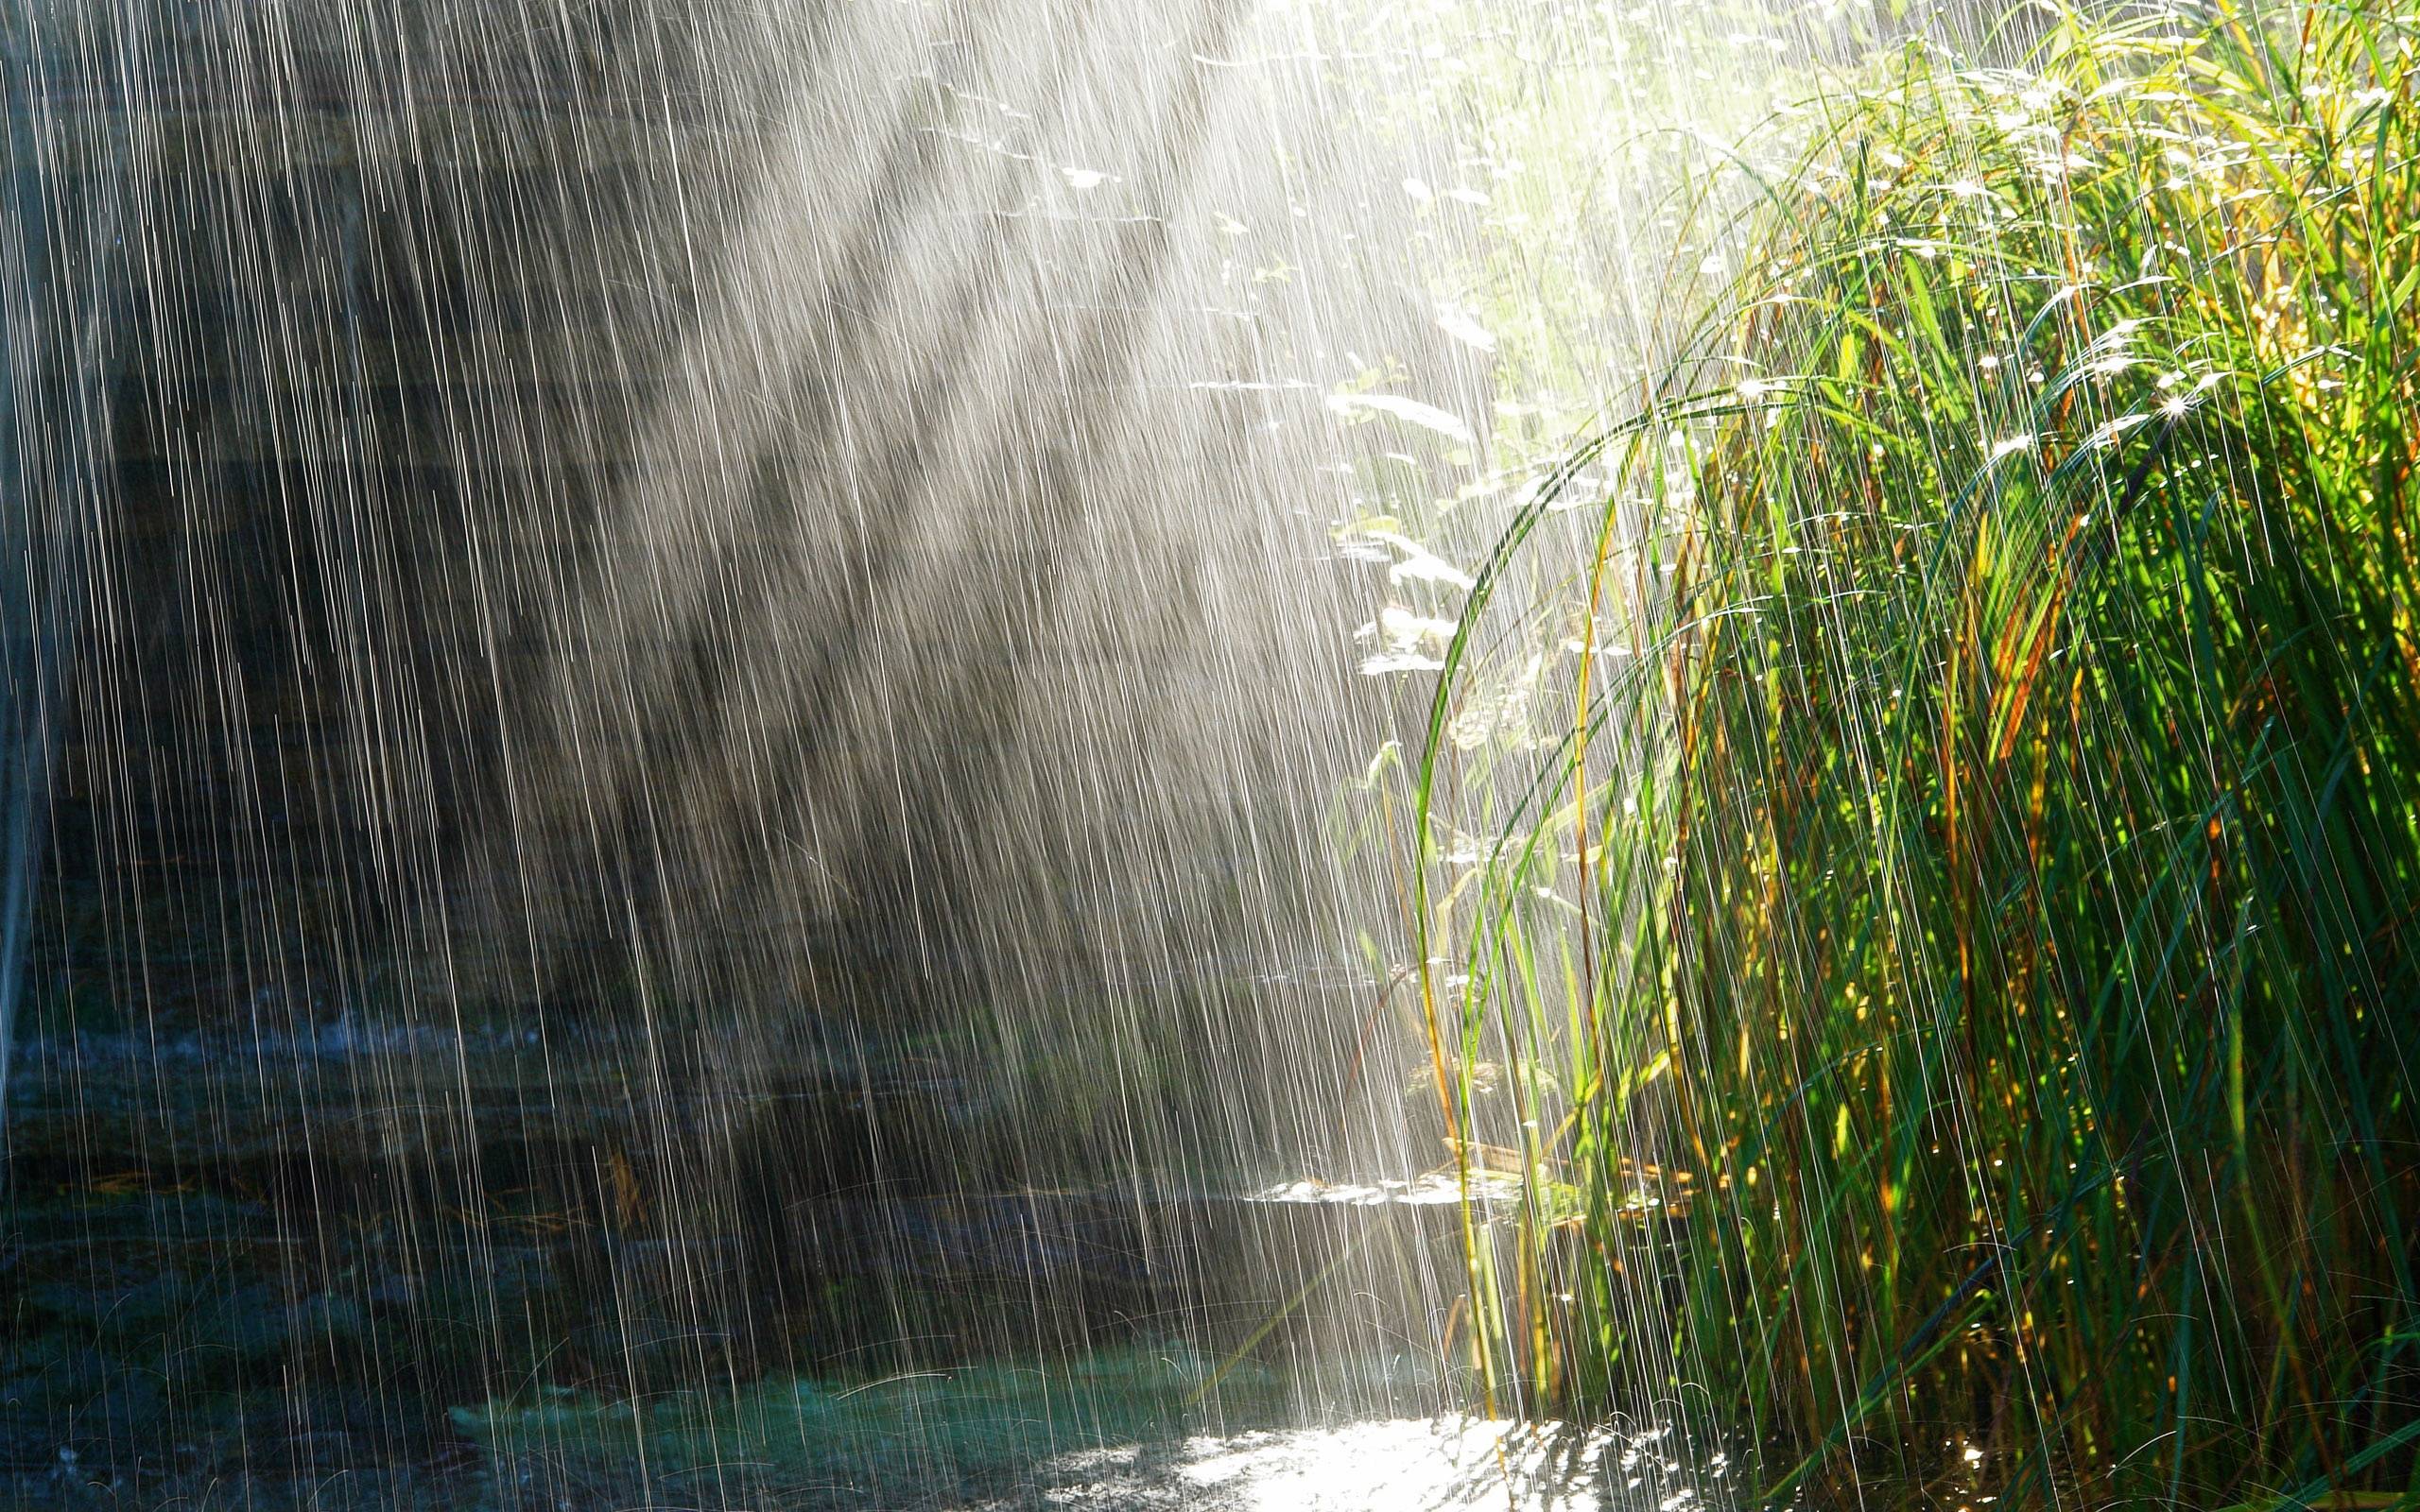 rainy day live wallpaper,water,nature,green,vegetation,water resources